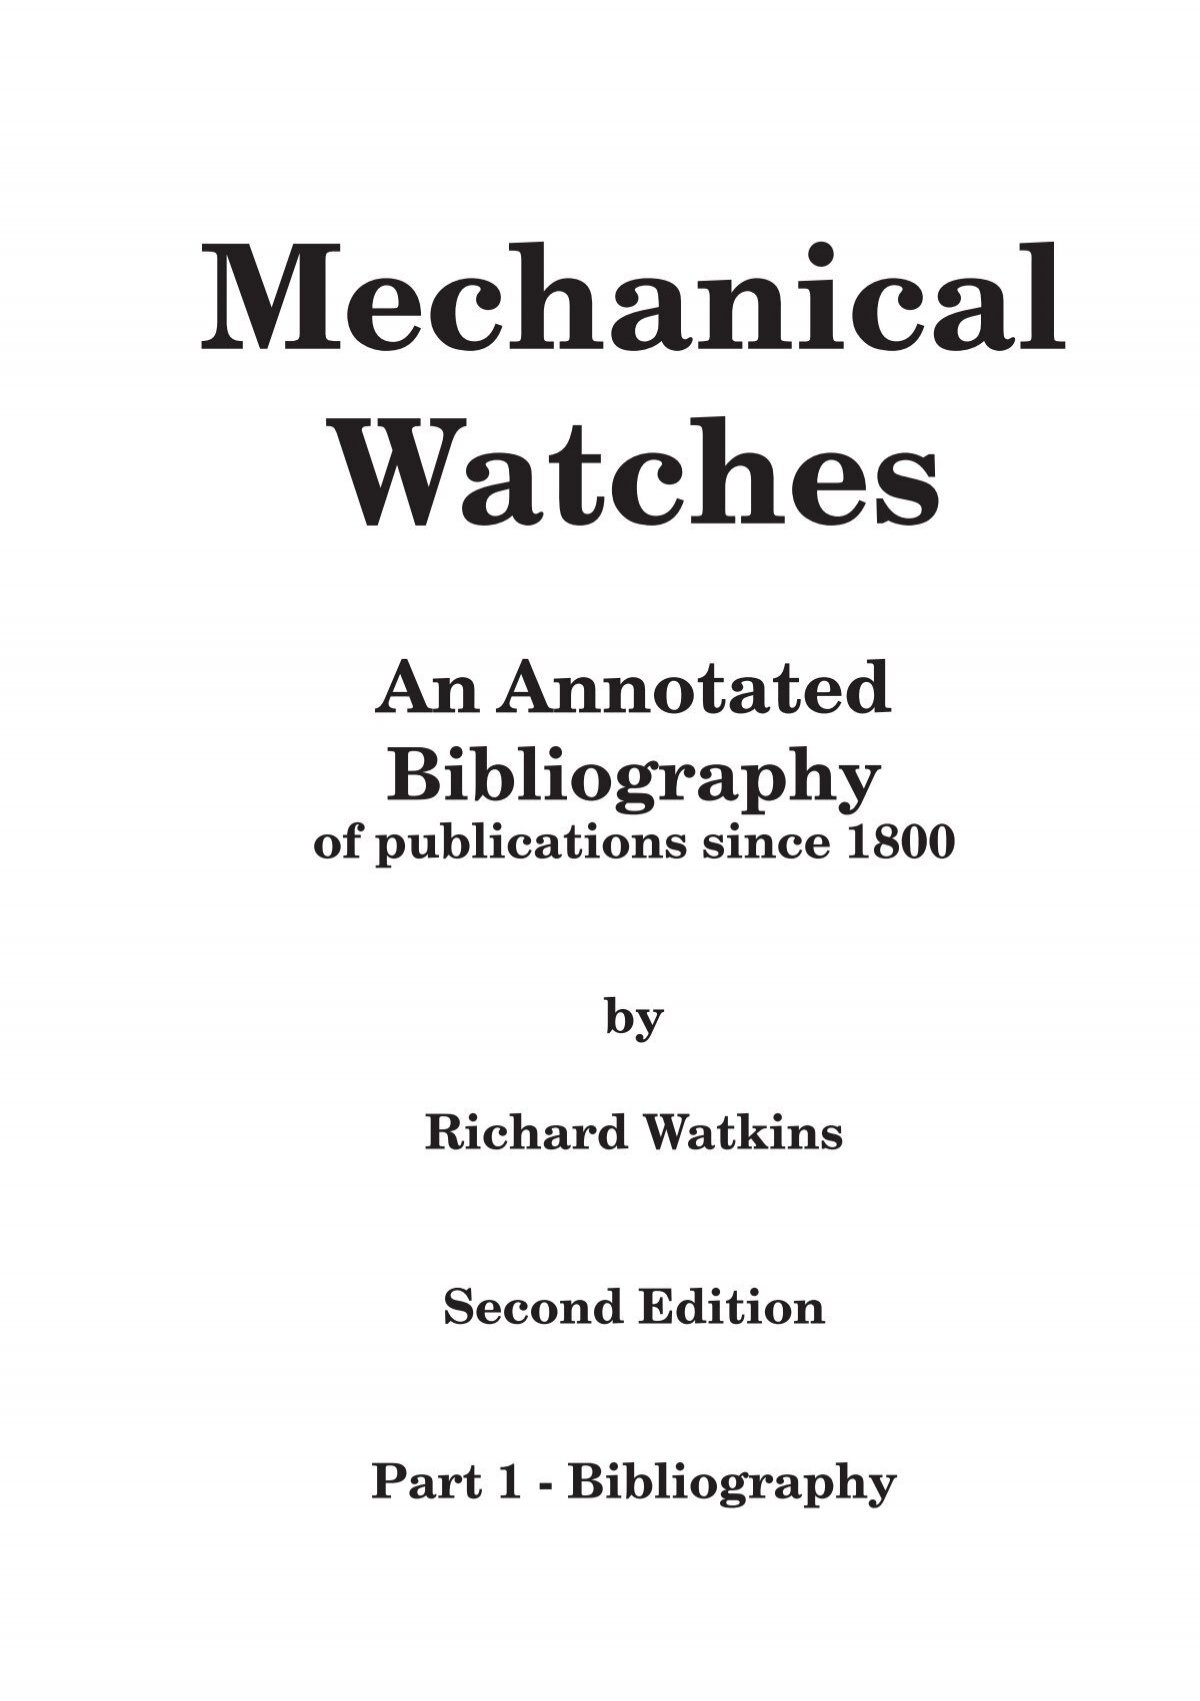 An Annotated Bibliography - Horology - The Index